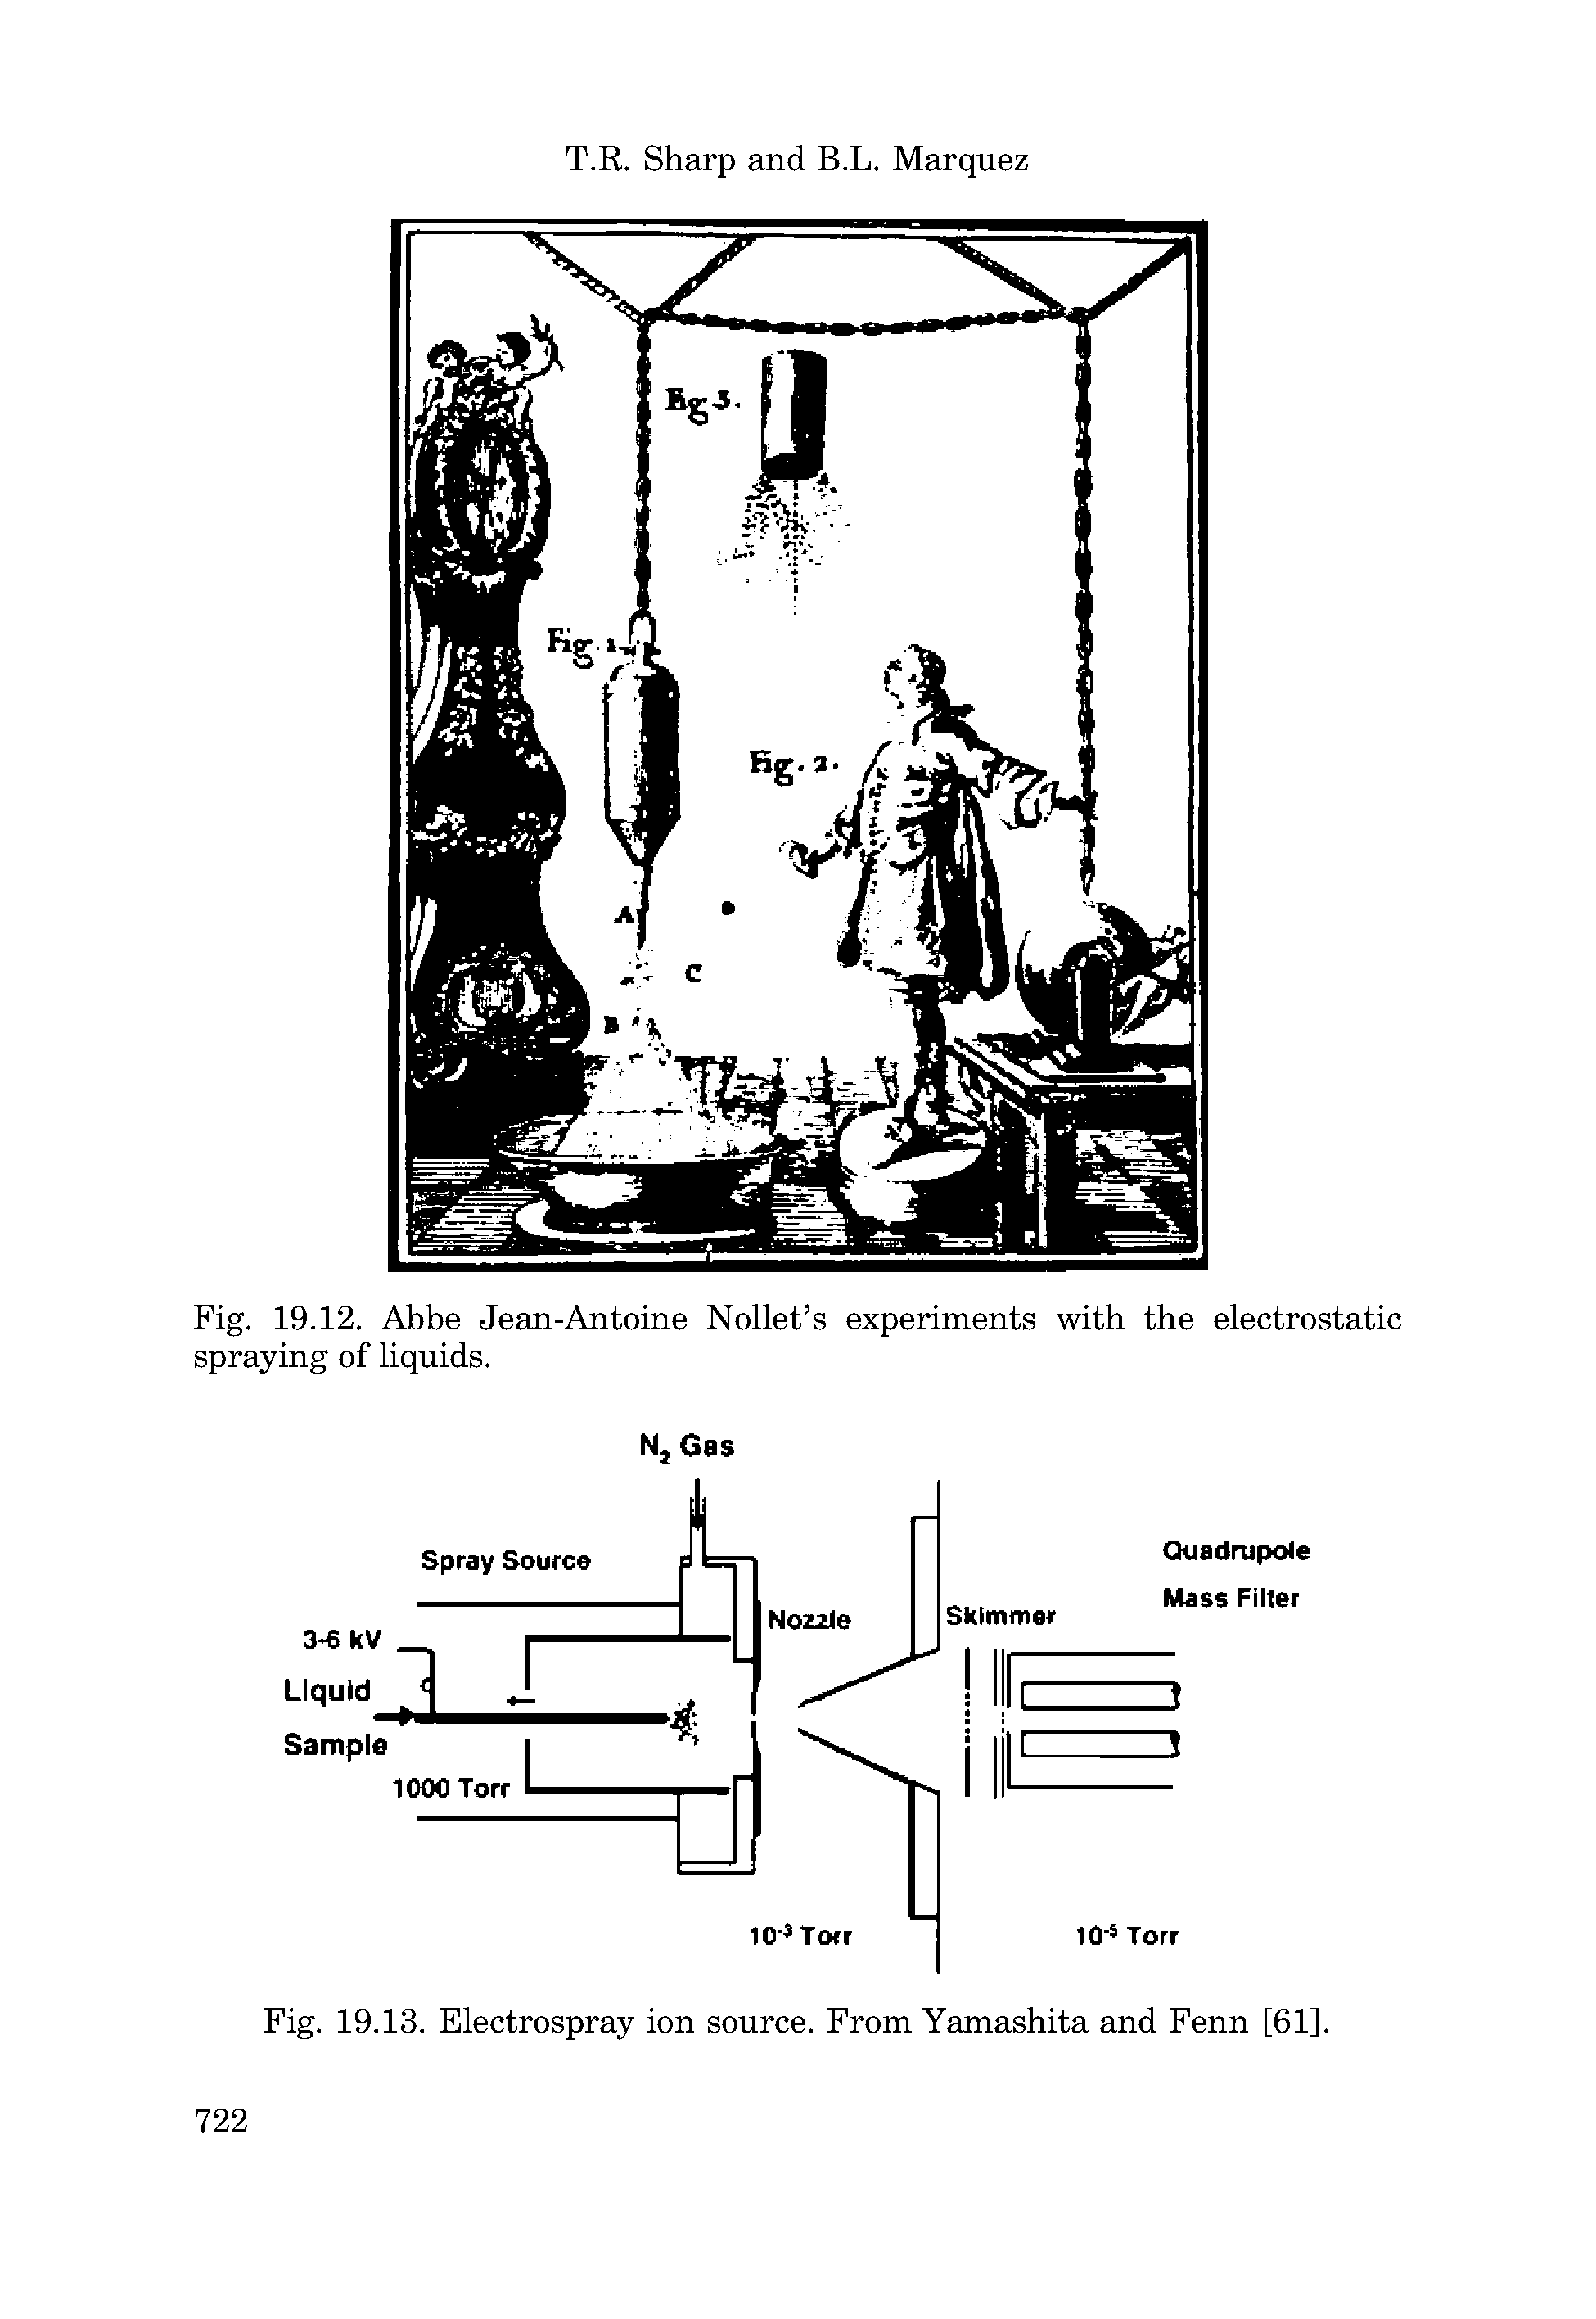 Fig. 19.12. Abbe Jean-Antoine Nollet s experiments with the electrostatic spraying of liquids.